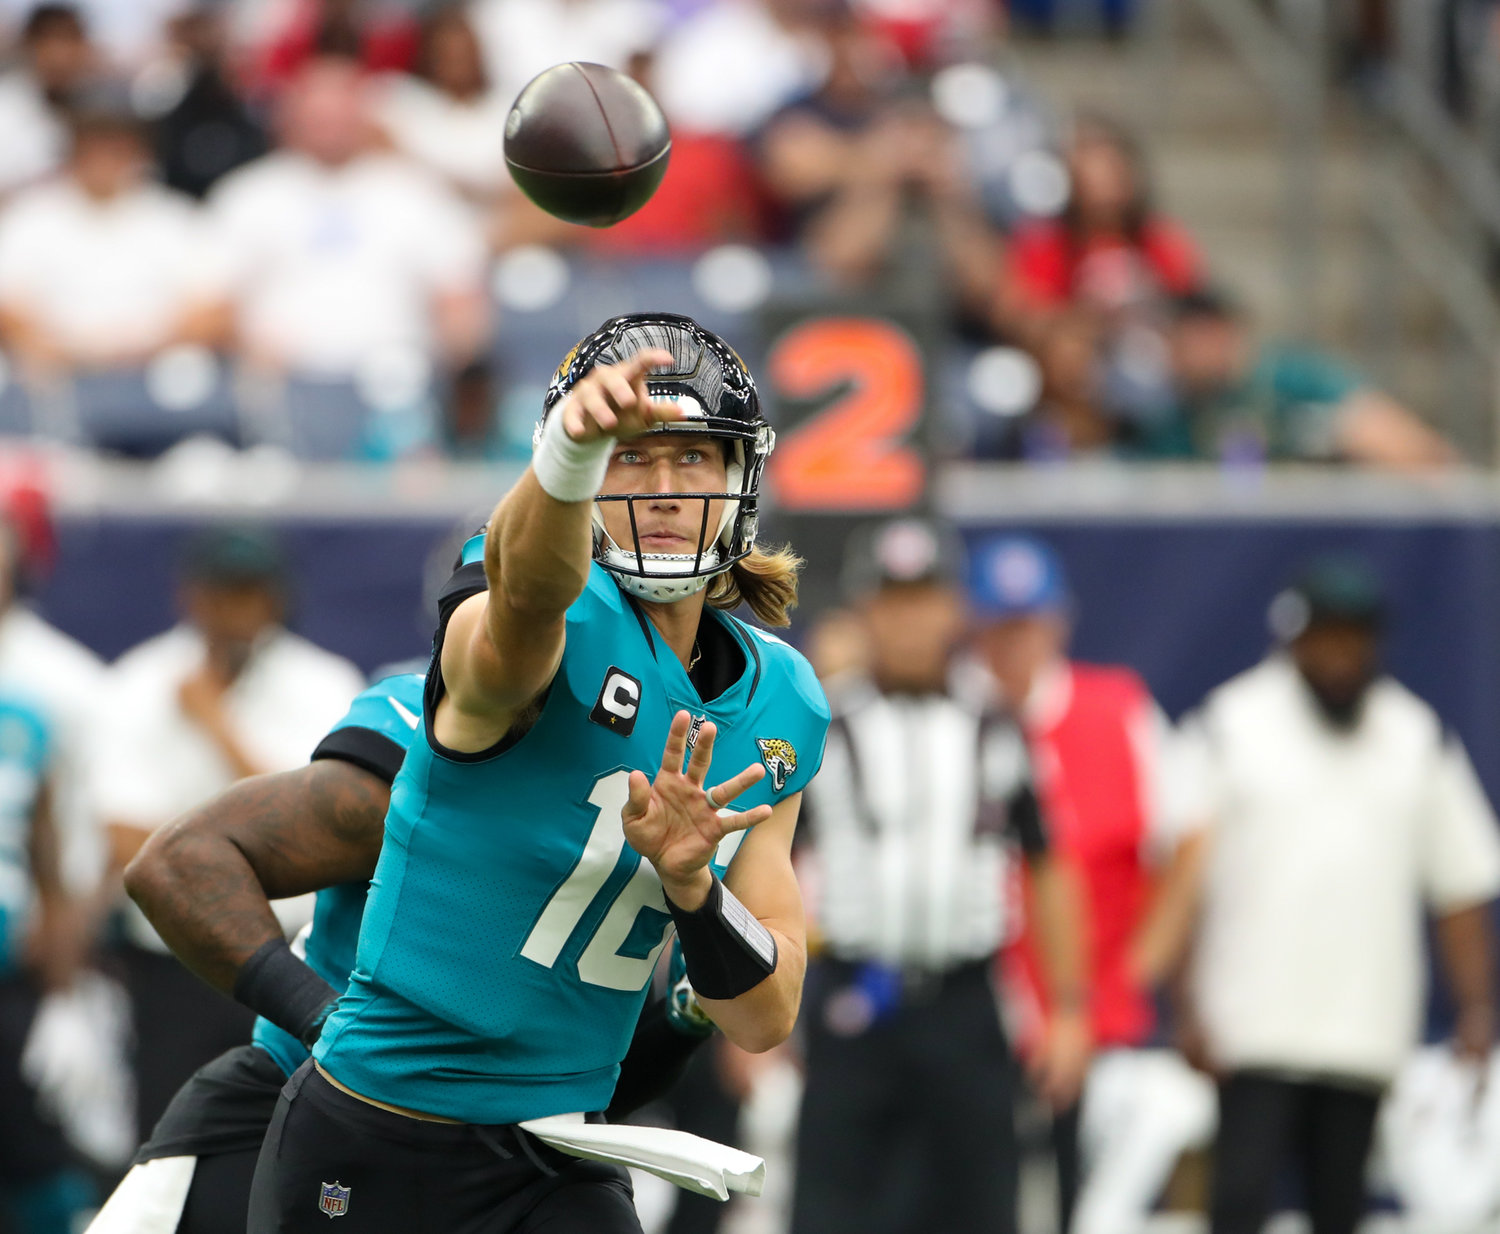 Jacksonville Jaguars quarterback Trevor Lawrence (16) passes the ball during the first half of an NFL game between the Houston Texans and the Jacksonville Jaguars on September 12, 2021 in Houston, Texas.